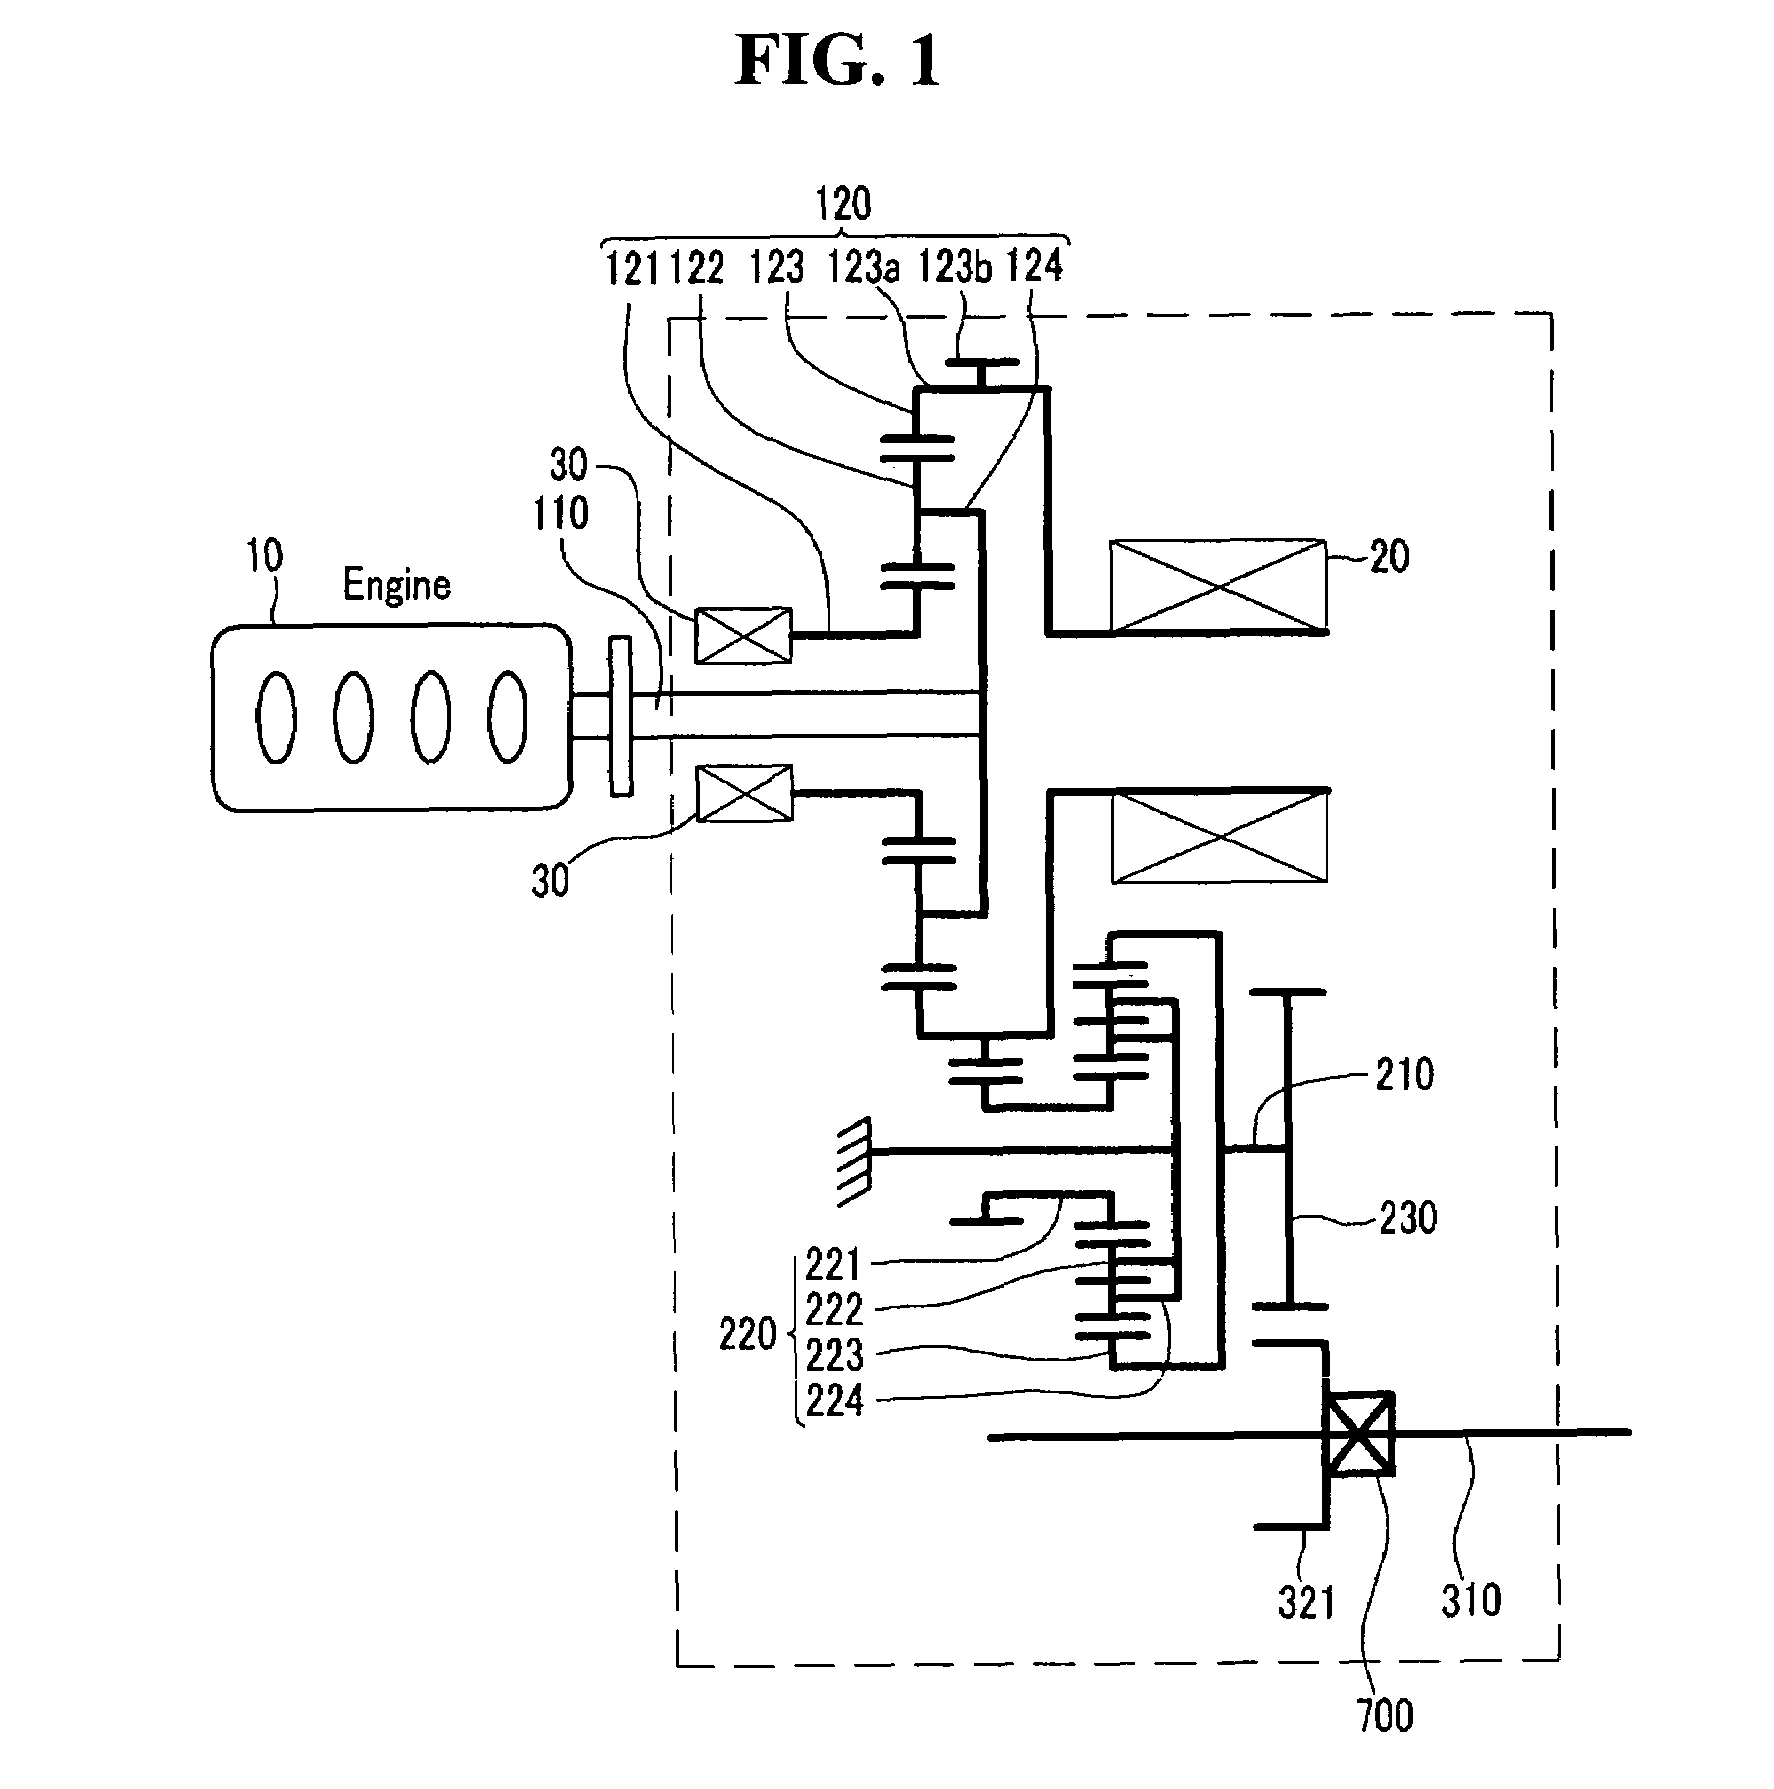 Power delivery system of a hybrid vehicle